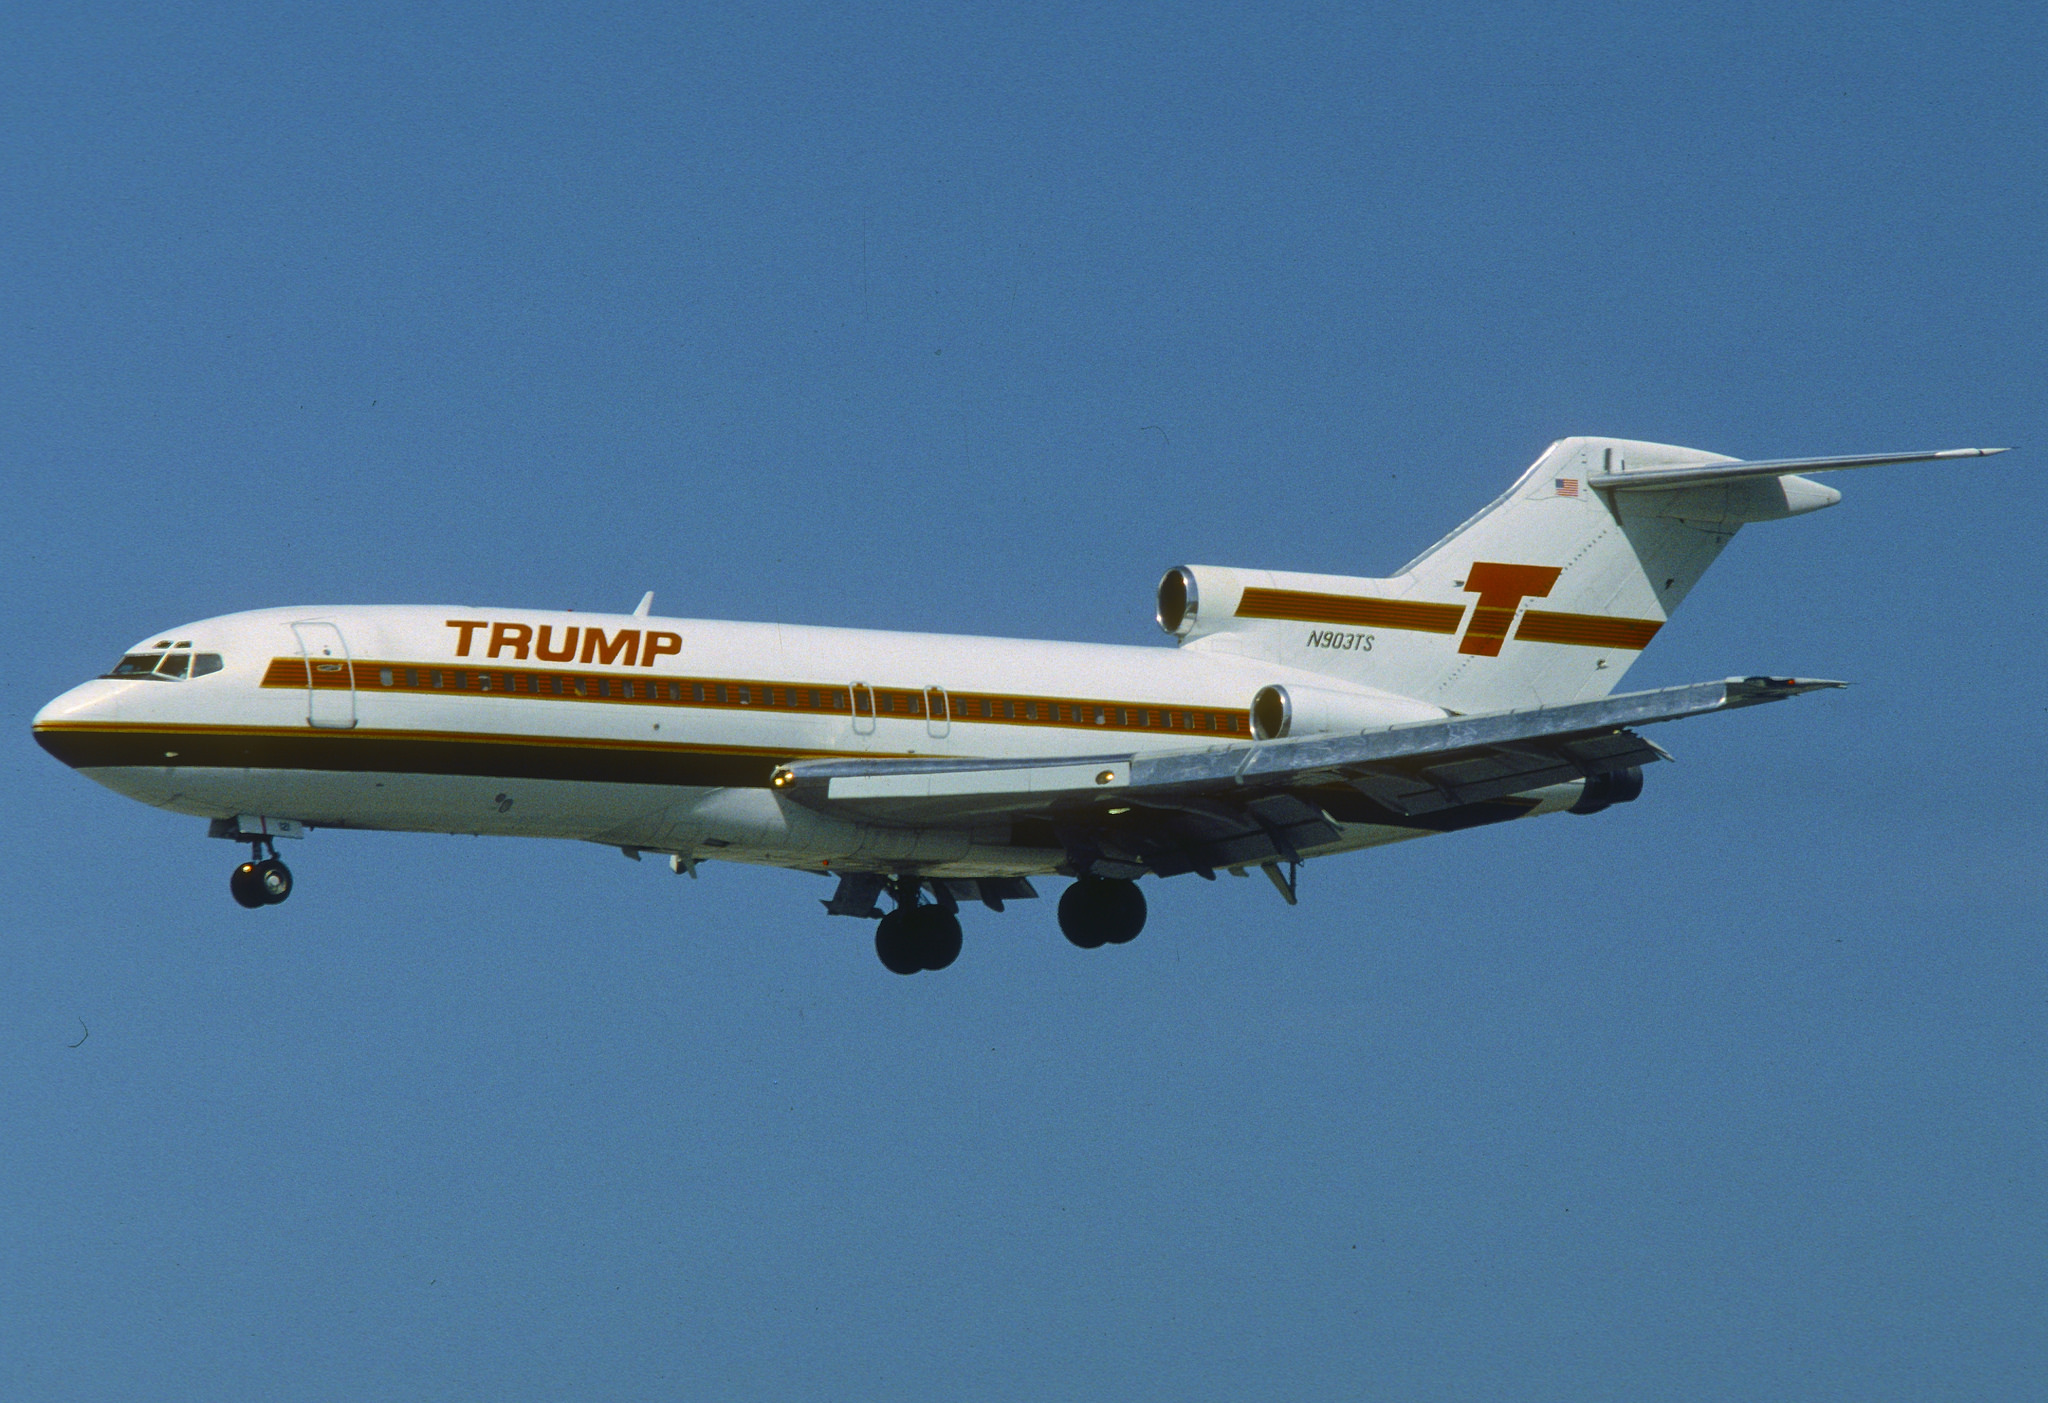 Donald Trump did not fly 200 Marines to Florida on his private jet in 1991